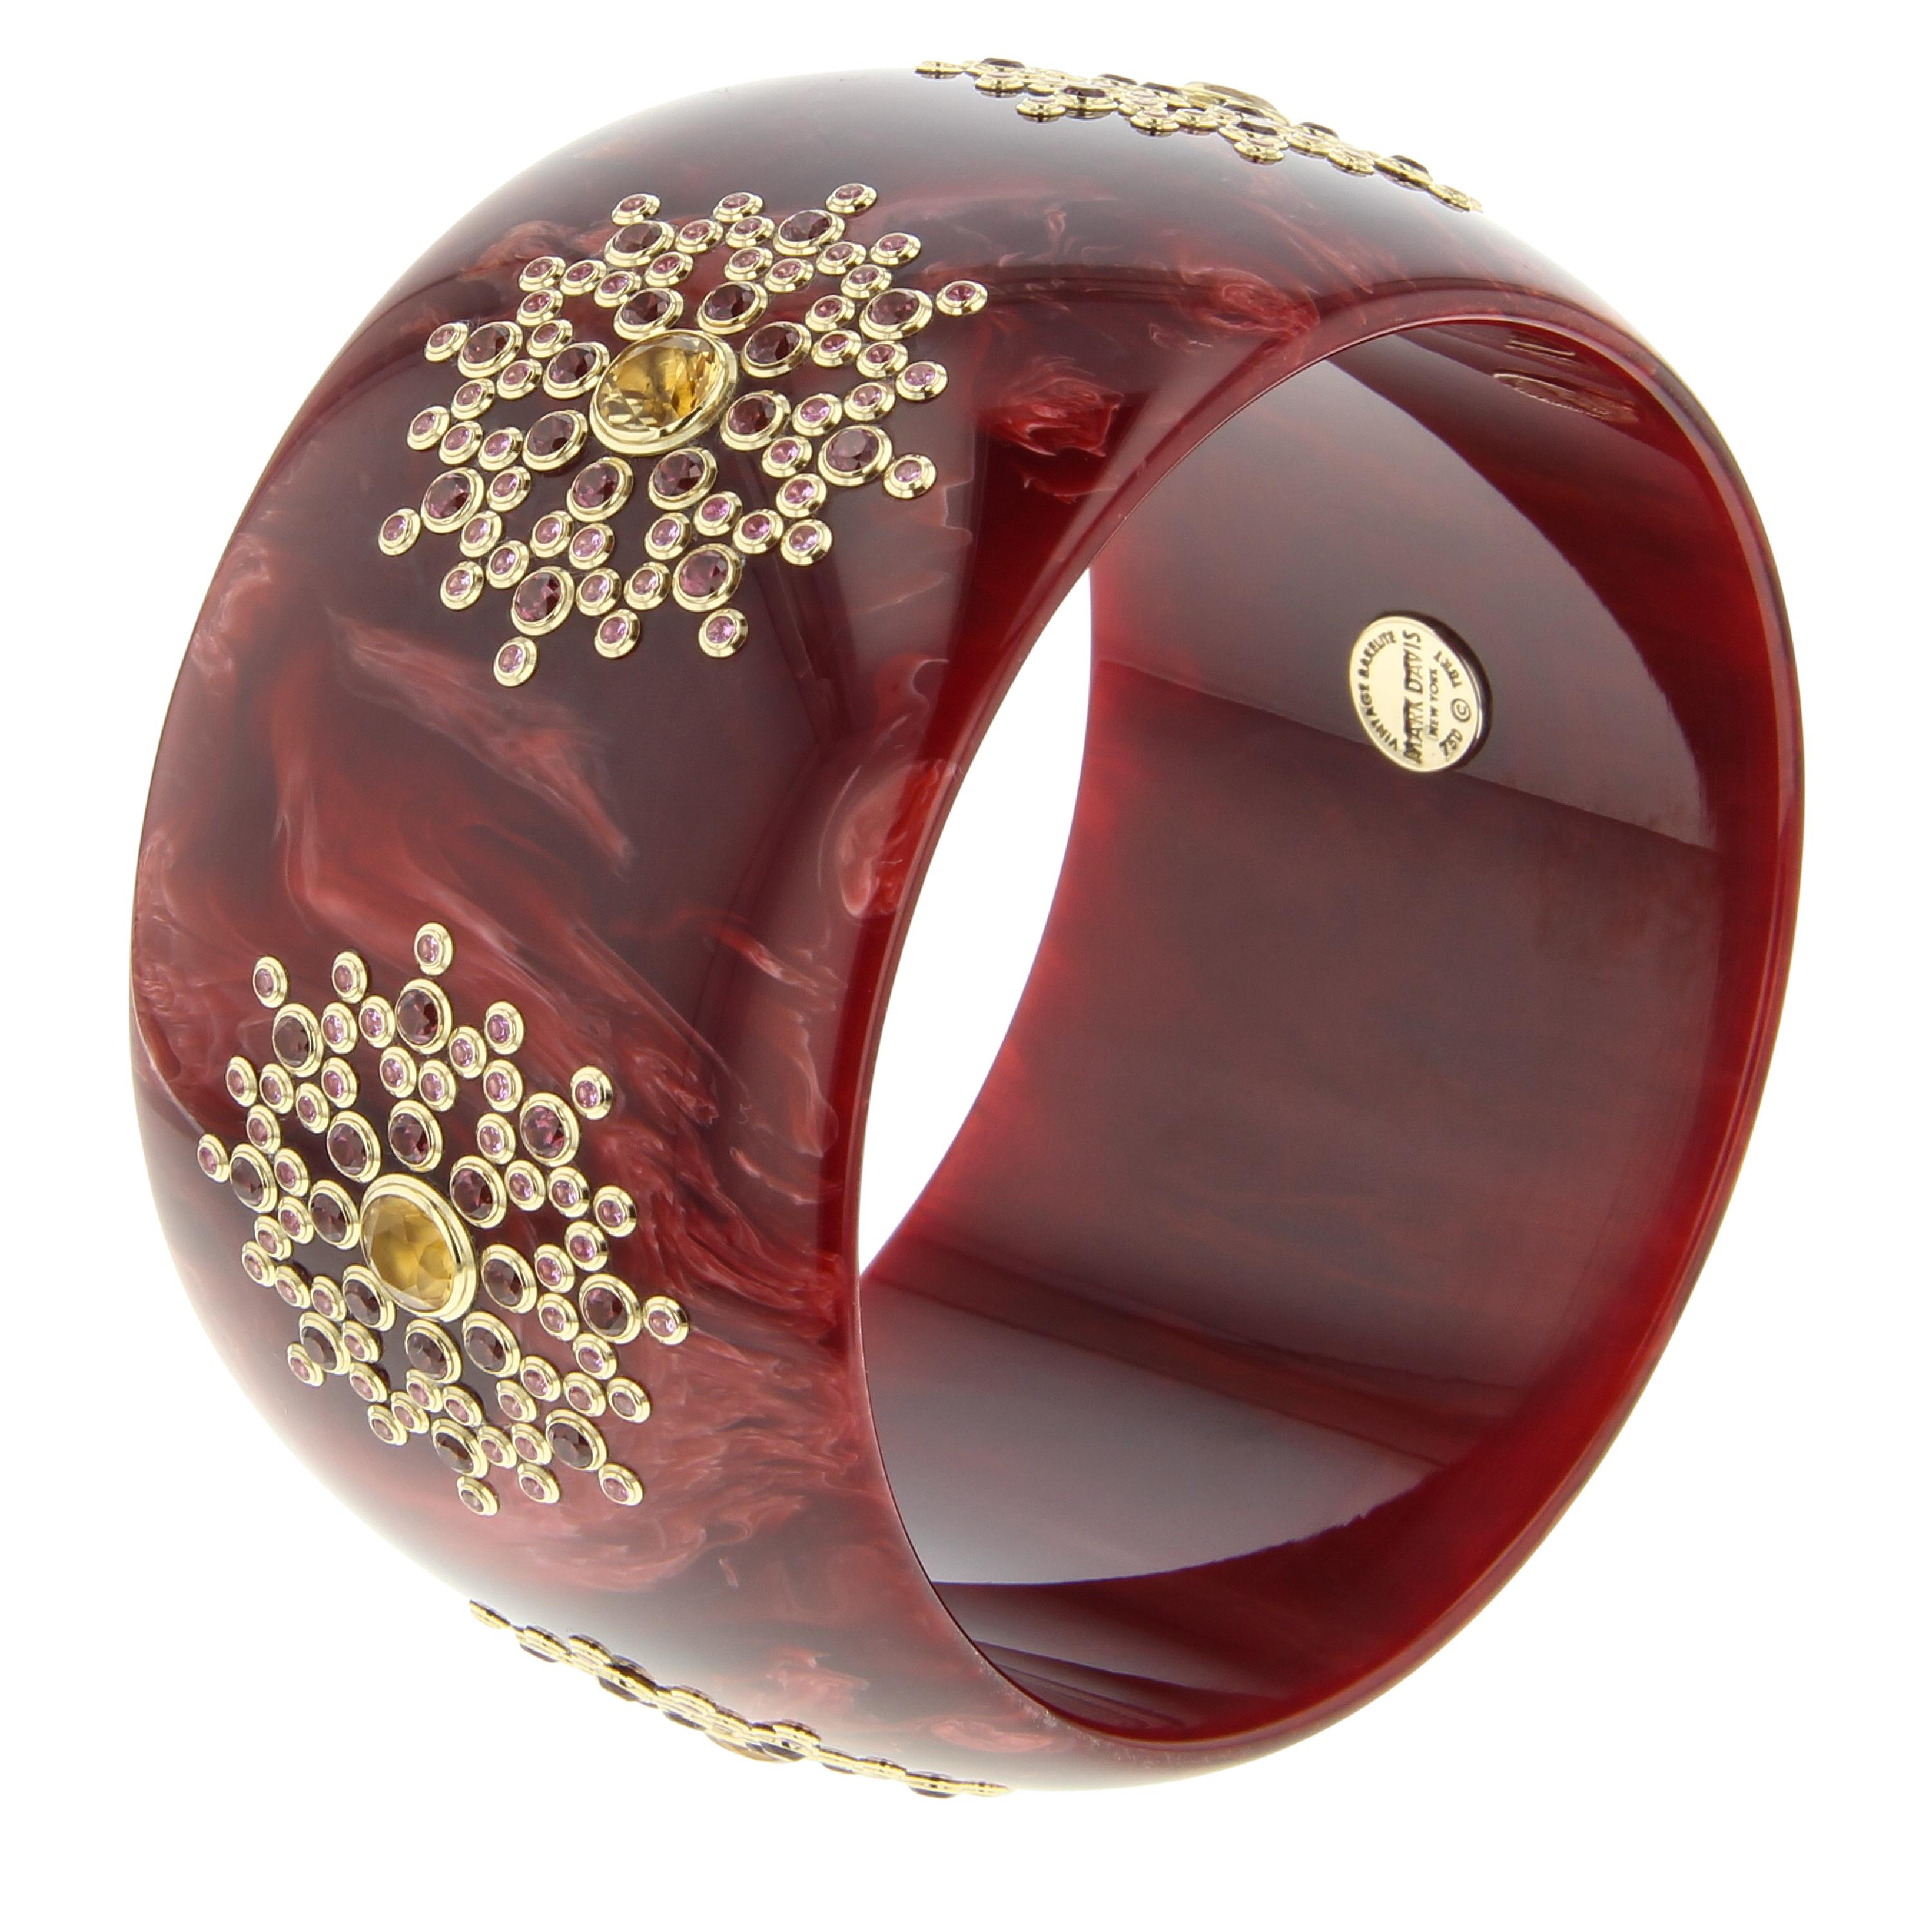 This elegant bangle was created with a rich, vintage, burgundy bakelite that has been set with fine gemstones in a complex and super-precise geometric pattern. The color of the bakelite and gemstones makes this bangle ideal for year-round wear.